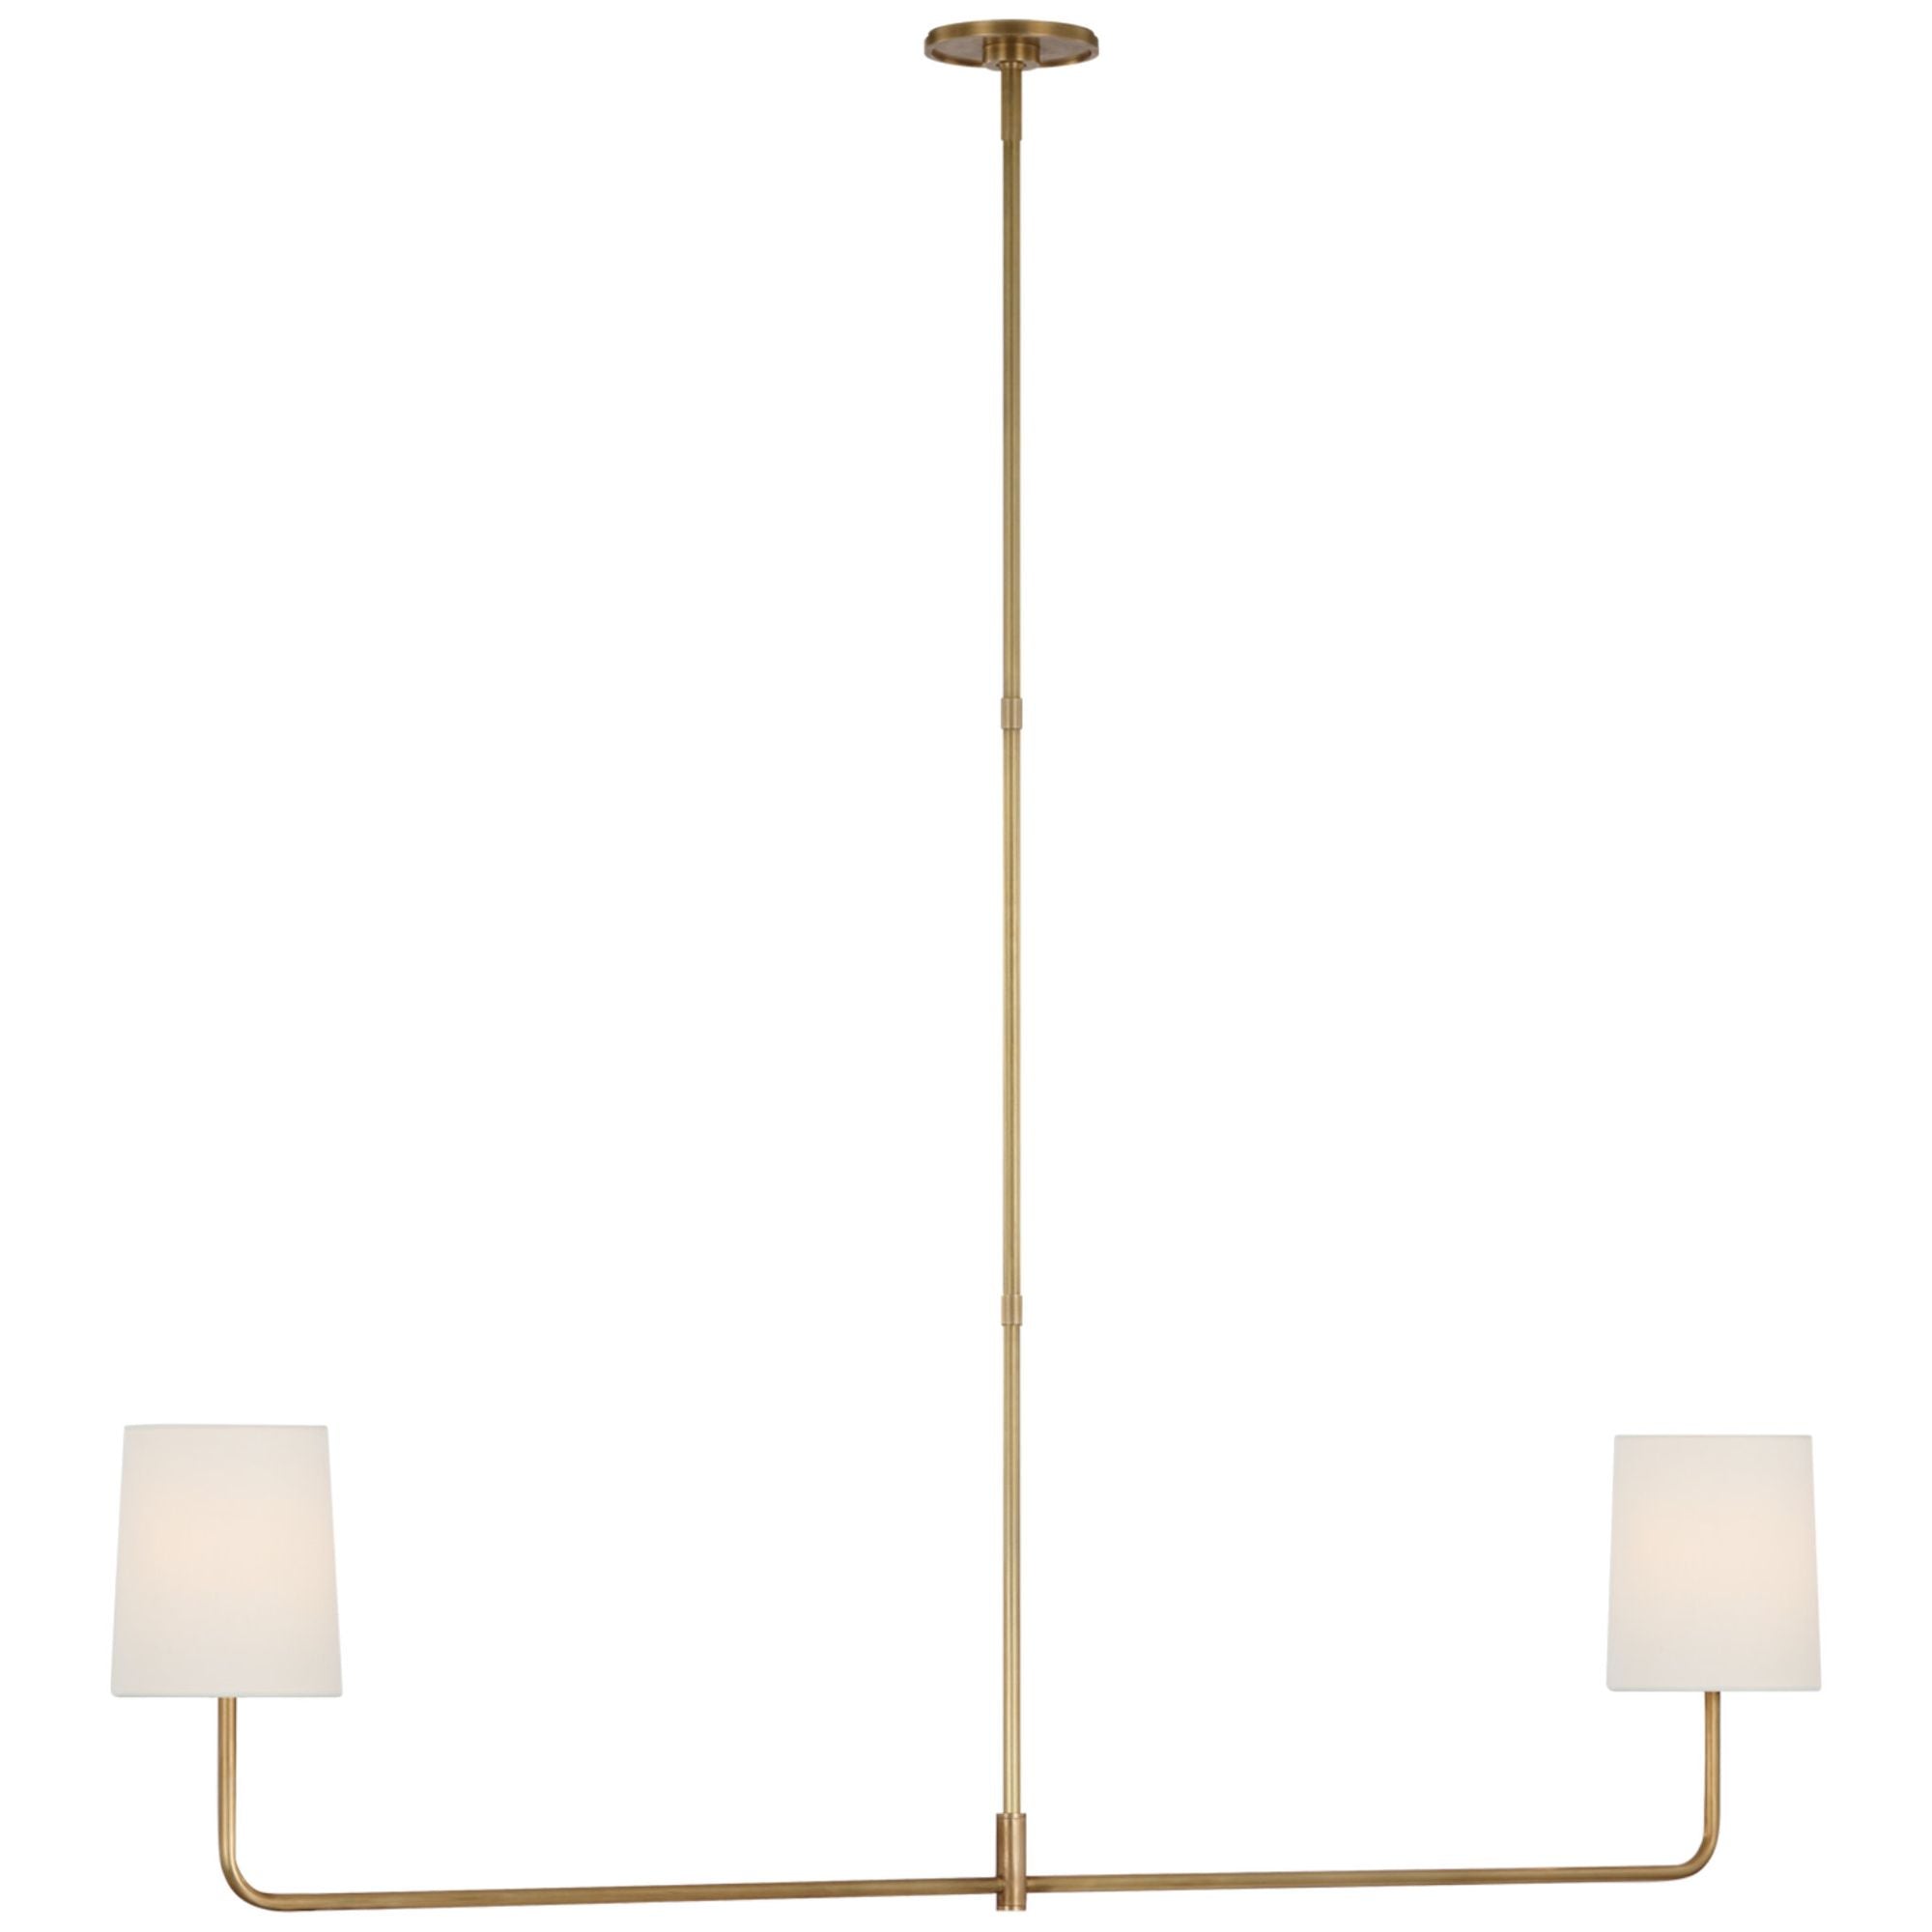 Barbara Barry Go Lightly 54" Two Light Linear Chandelier in Soft Brass with Linen Shades